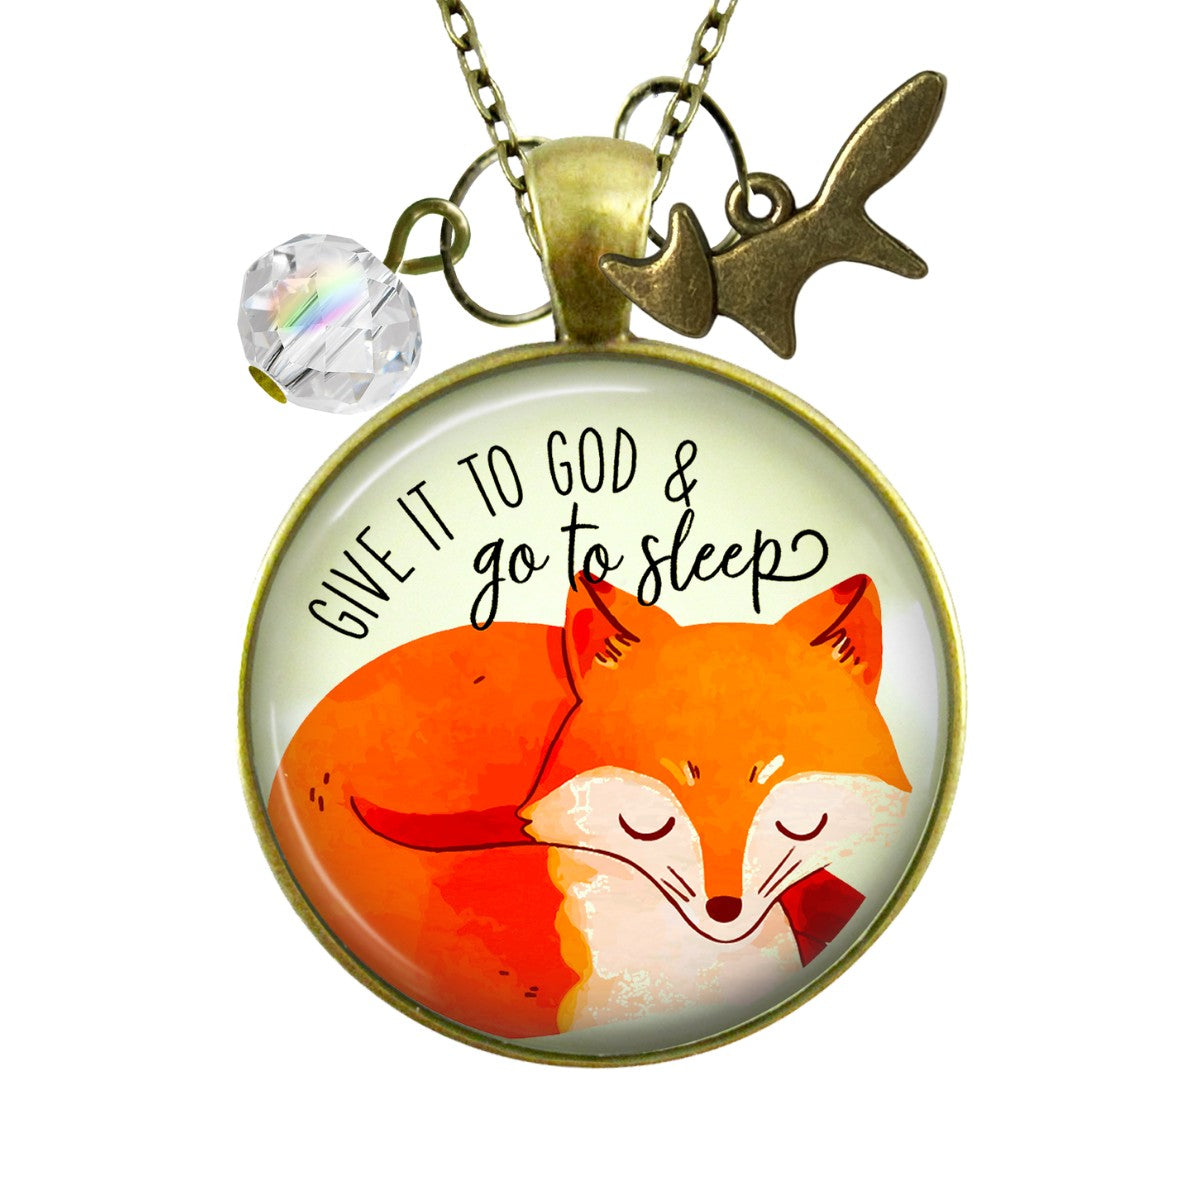 Fox Necklace Give It To God And Go To Sleep Cute Surrender Theme Quote Illustrated Pendant Faith Jewelry For Women  Necklace - Gutsy Goodness Handmade Jewelry